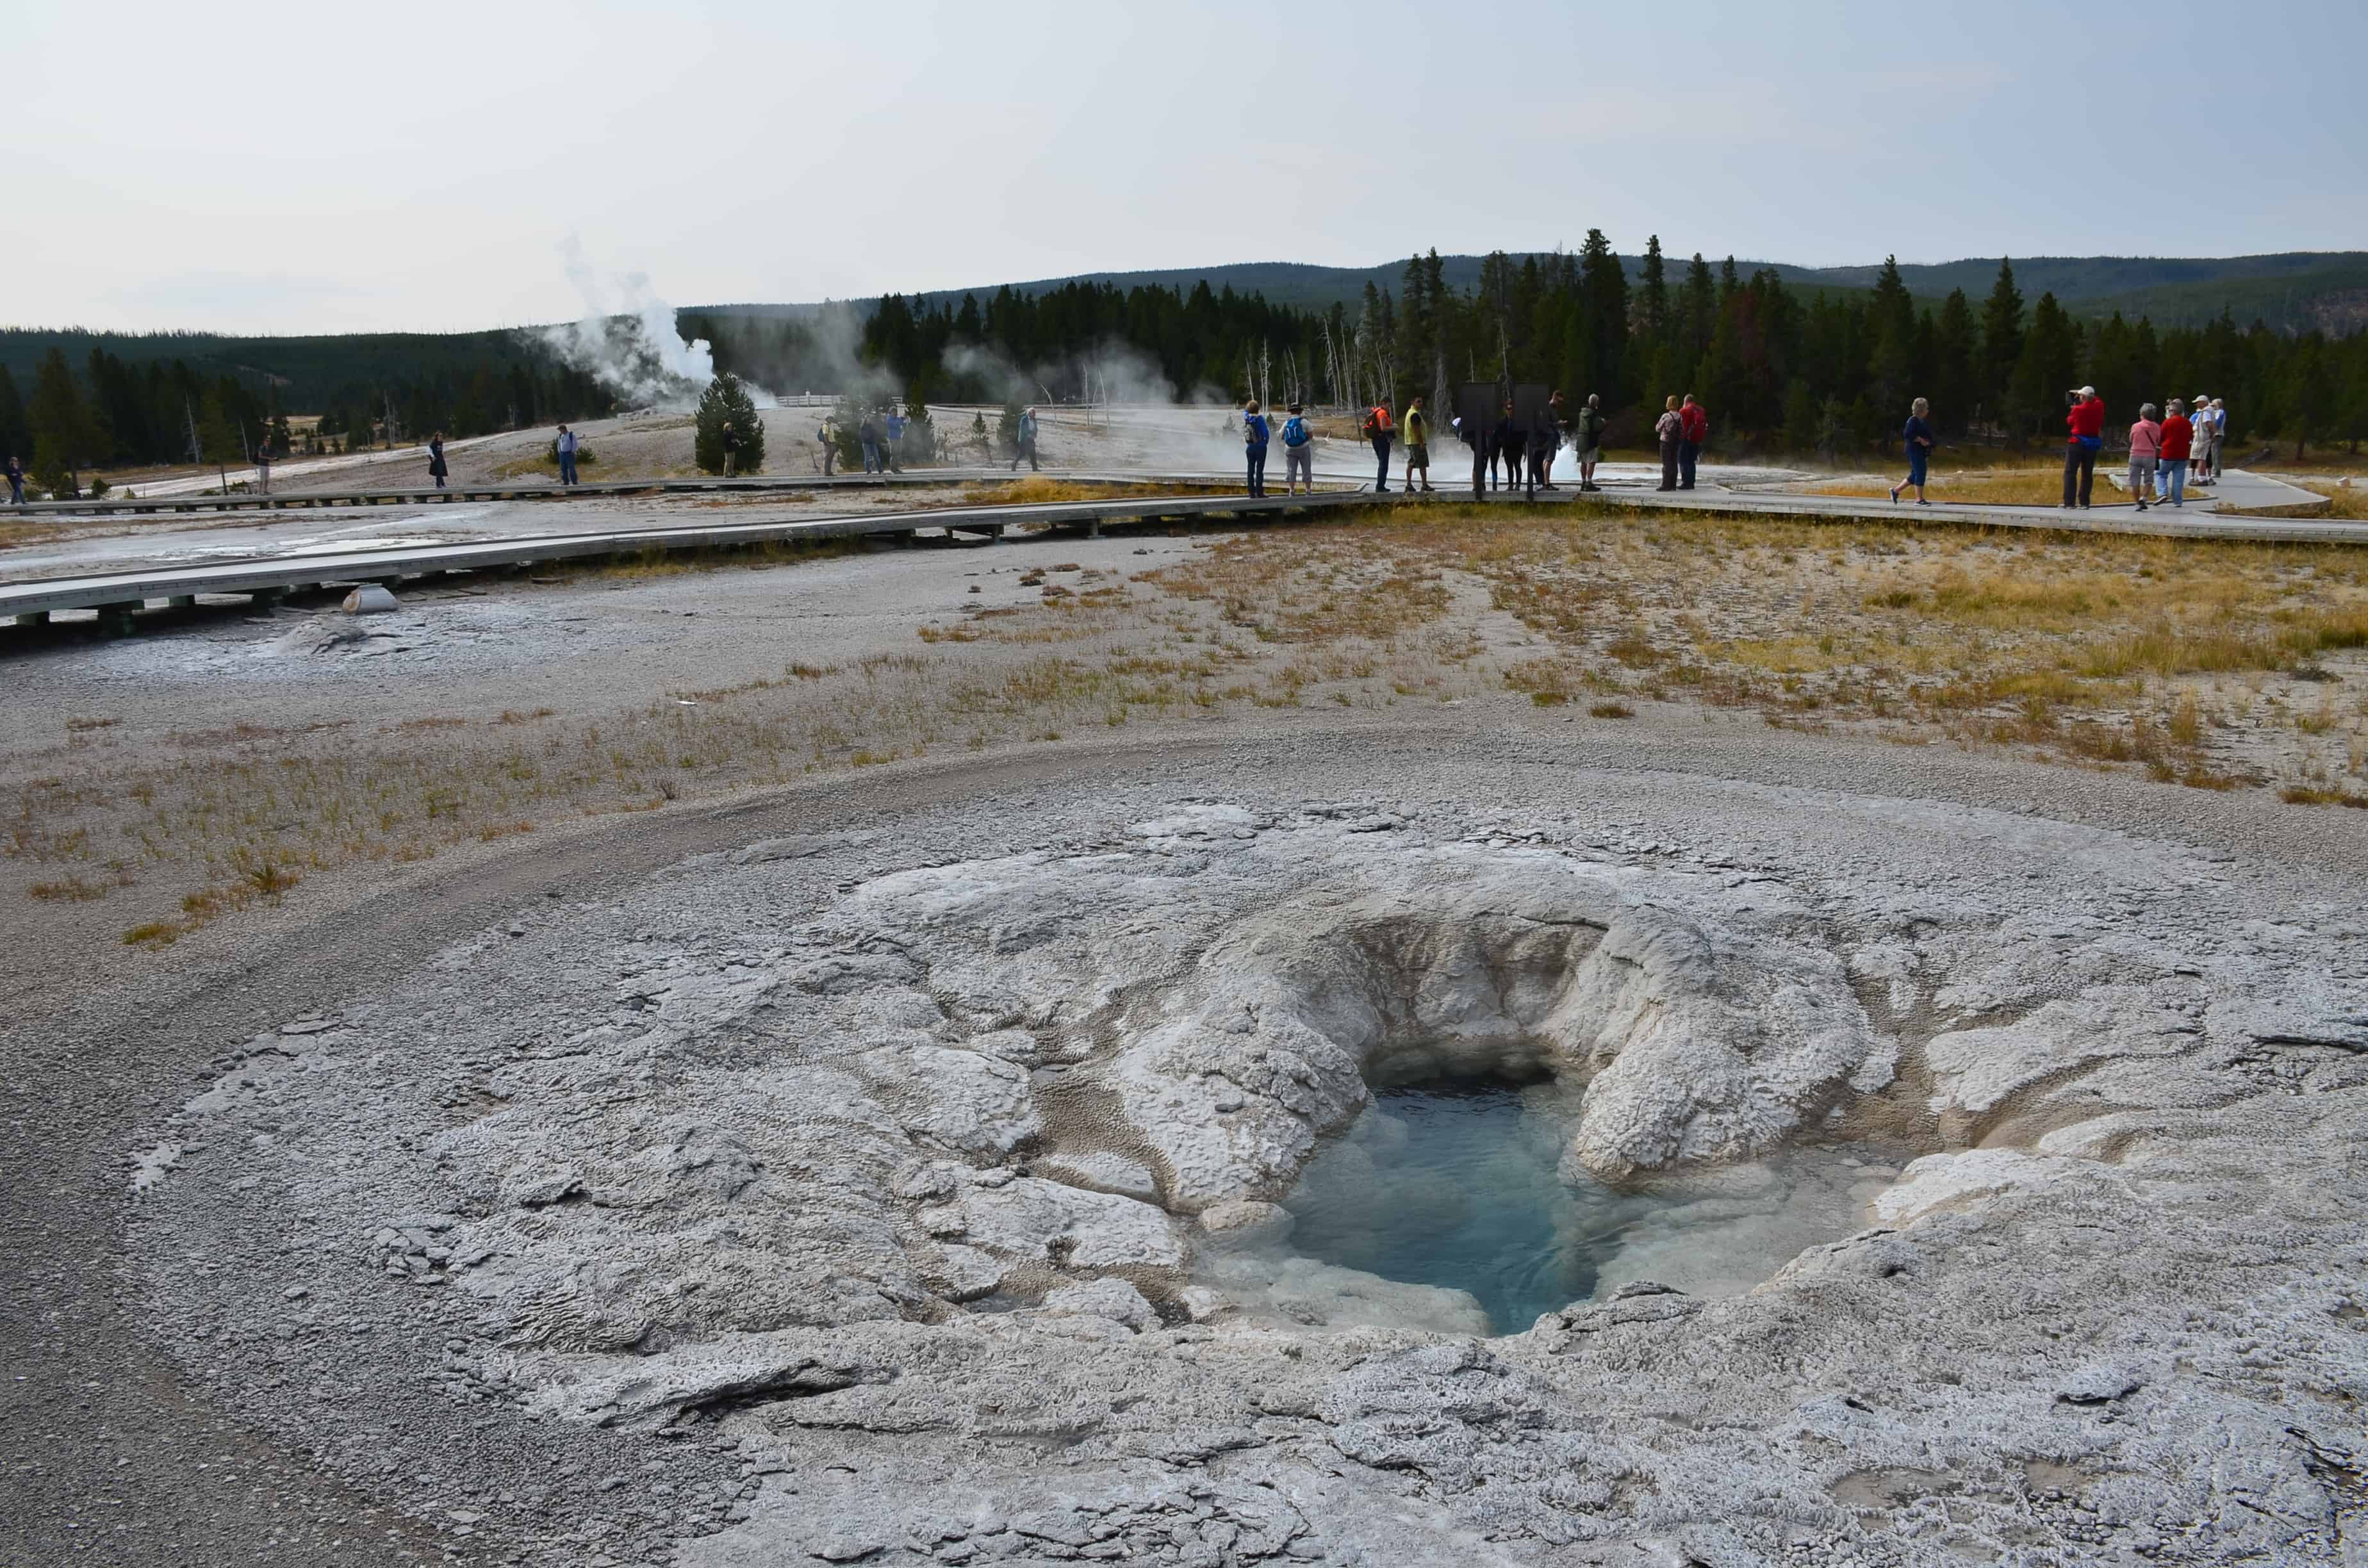 Oval Spring at the Upper Geyser Basin in Yellowstone National Park, Wyoming